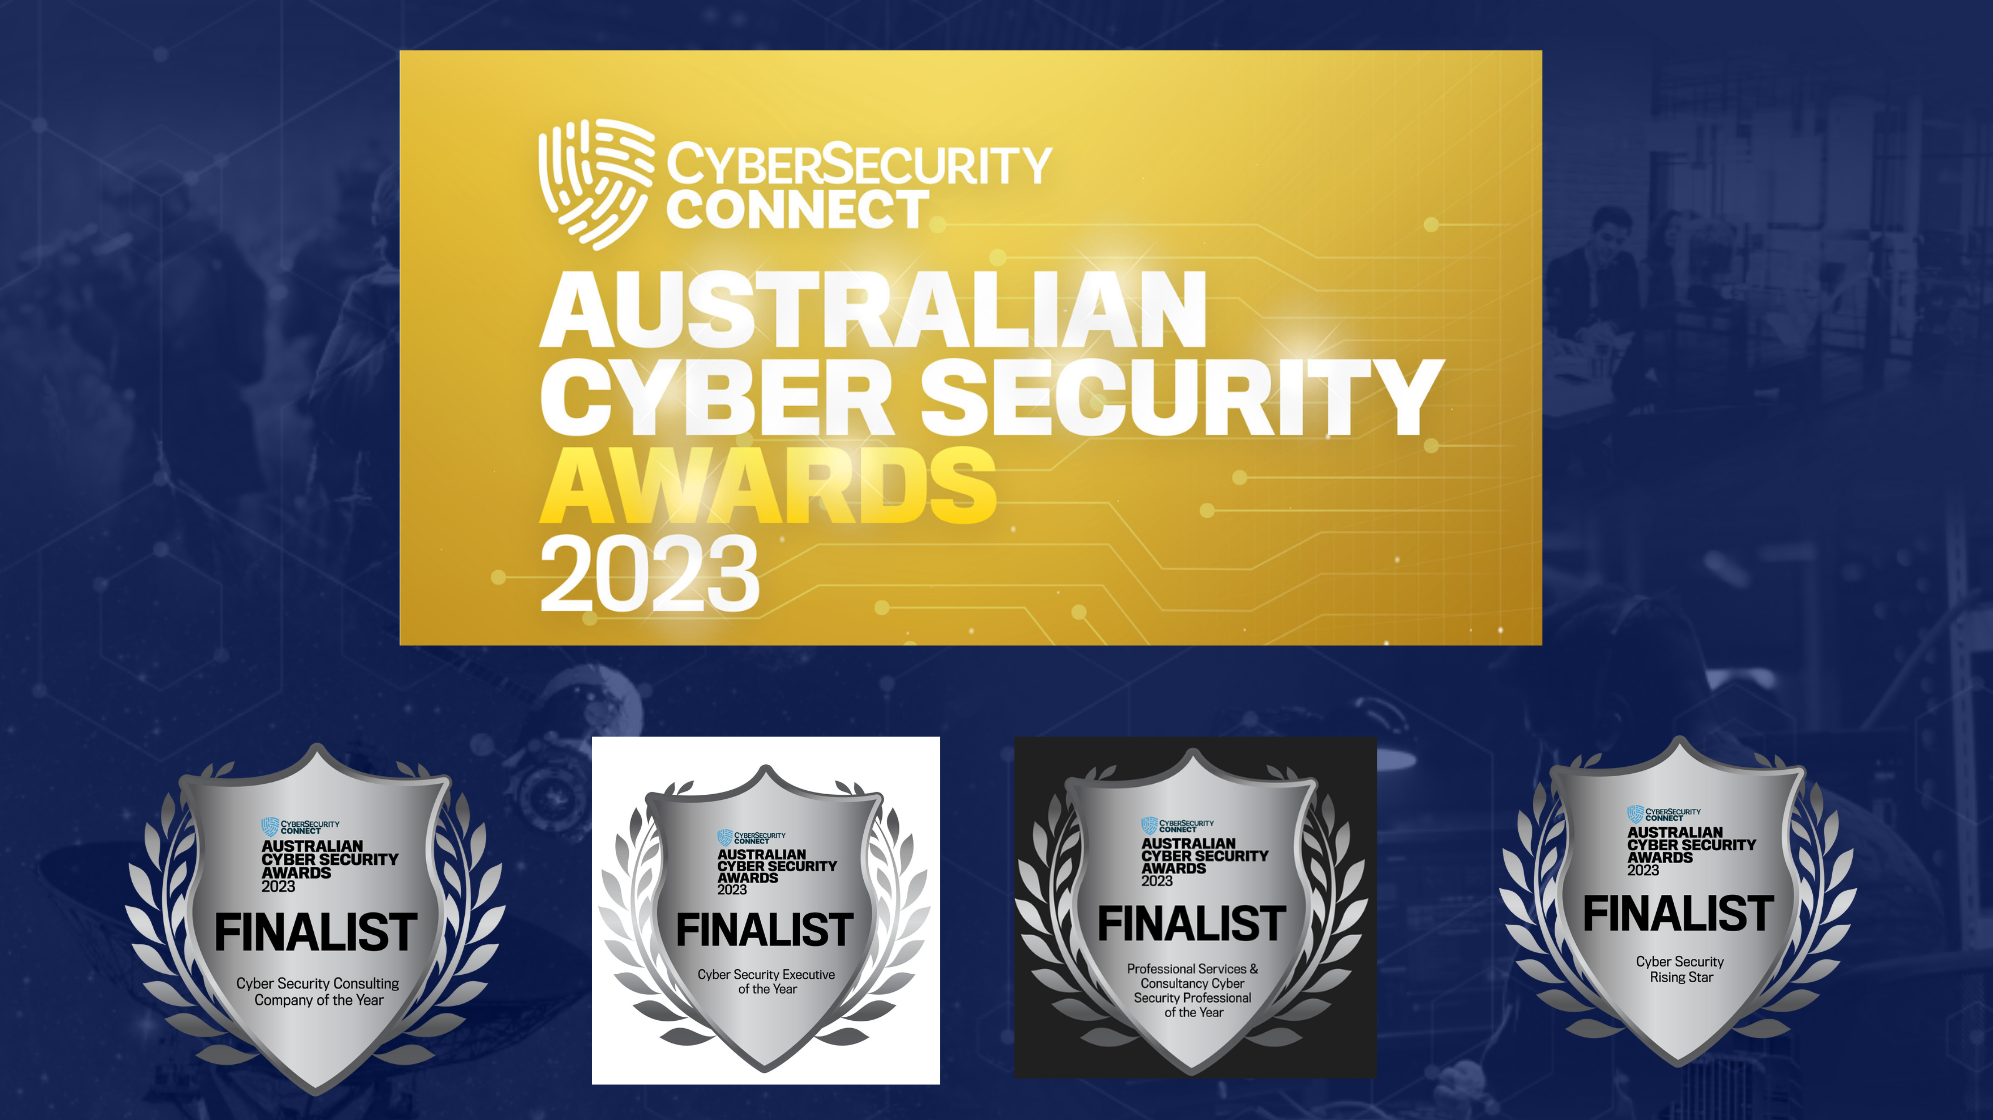 Bluerydge bags nominations at 2023 Australian Cyber Security Awards